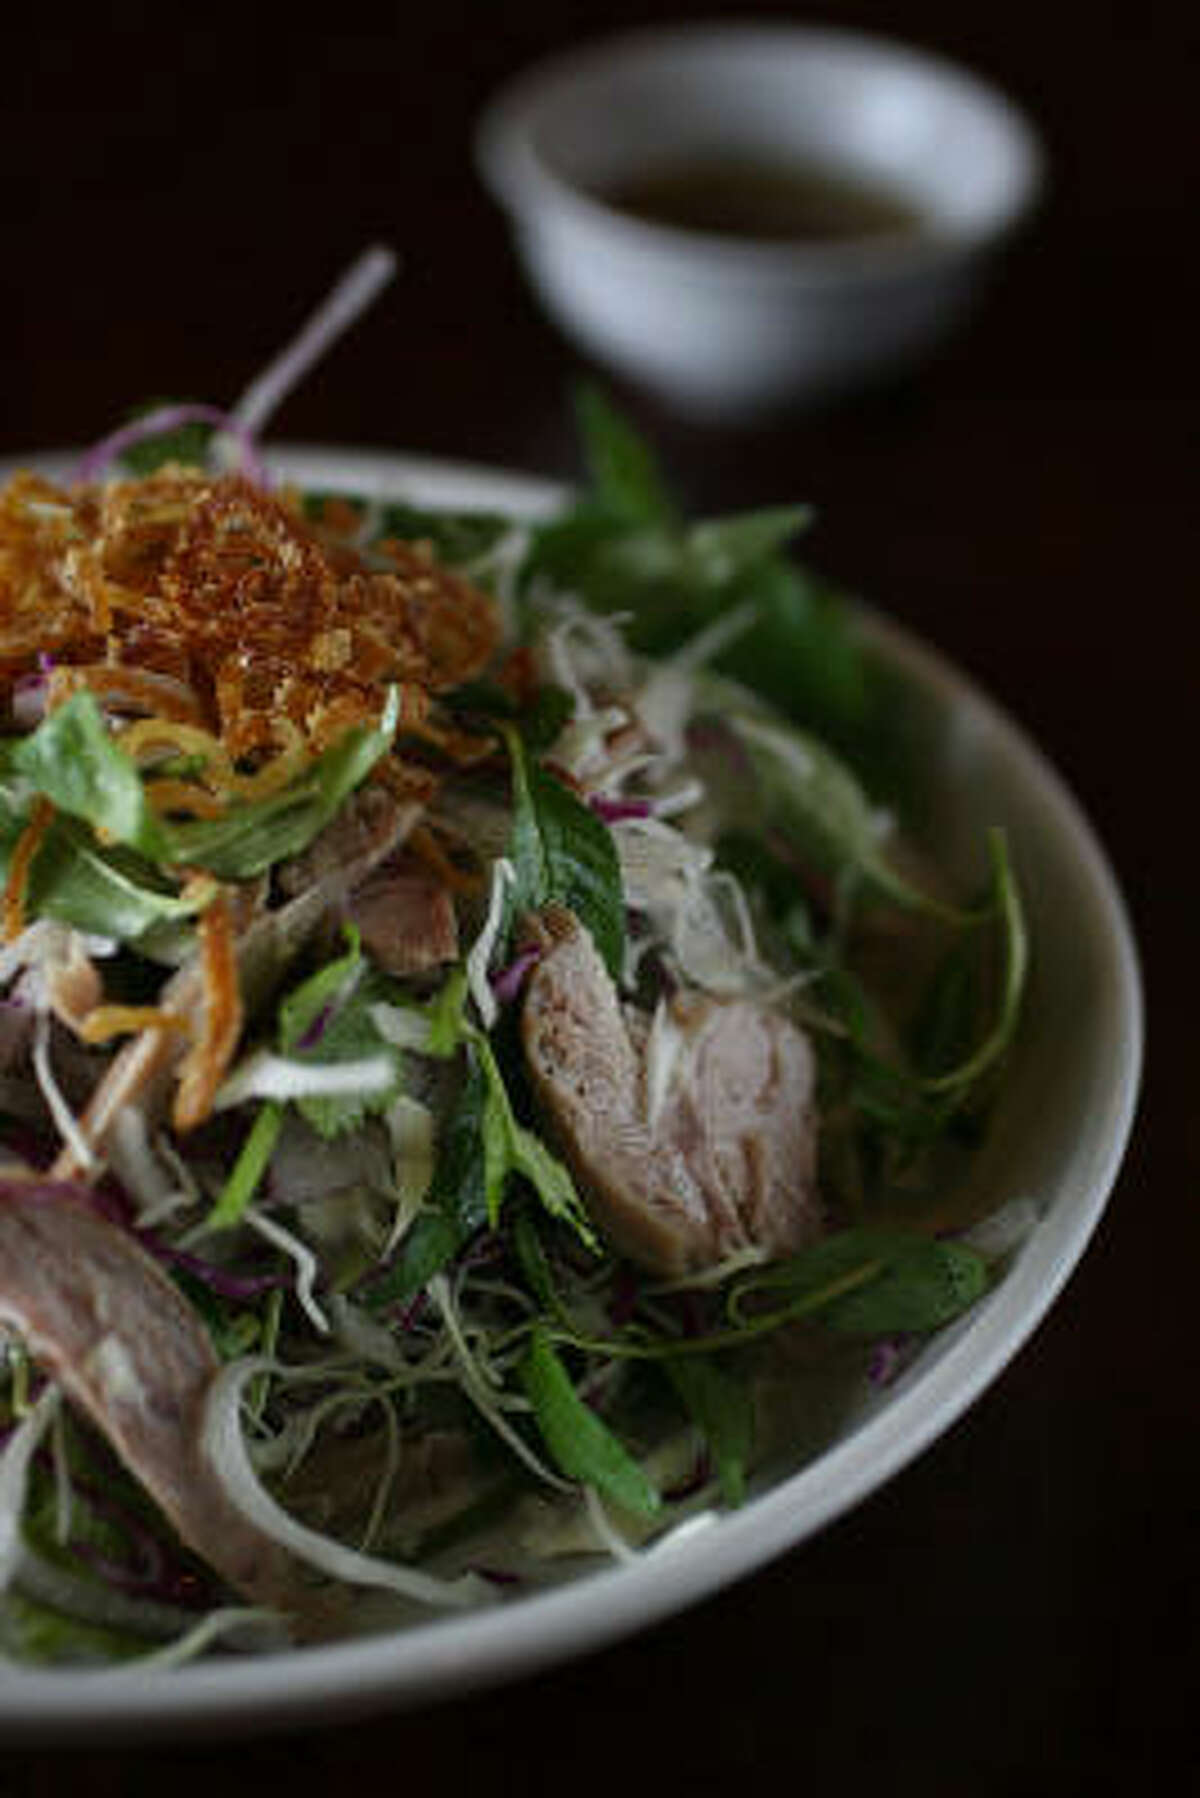 In goi vit, Lime, pepper, sugar, ginger and fish sauce made a garlicky dressing to splash over a shredded duck salad laced with slivered red onion and freshened with leaves of cilantro and rau.